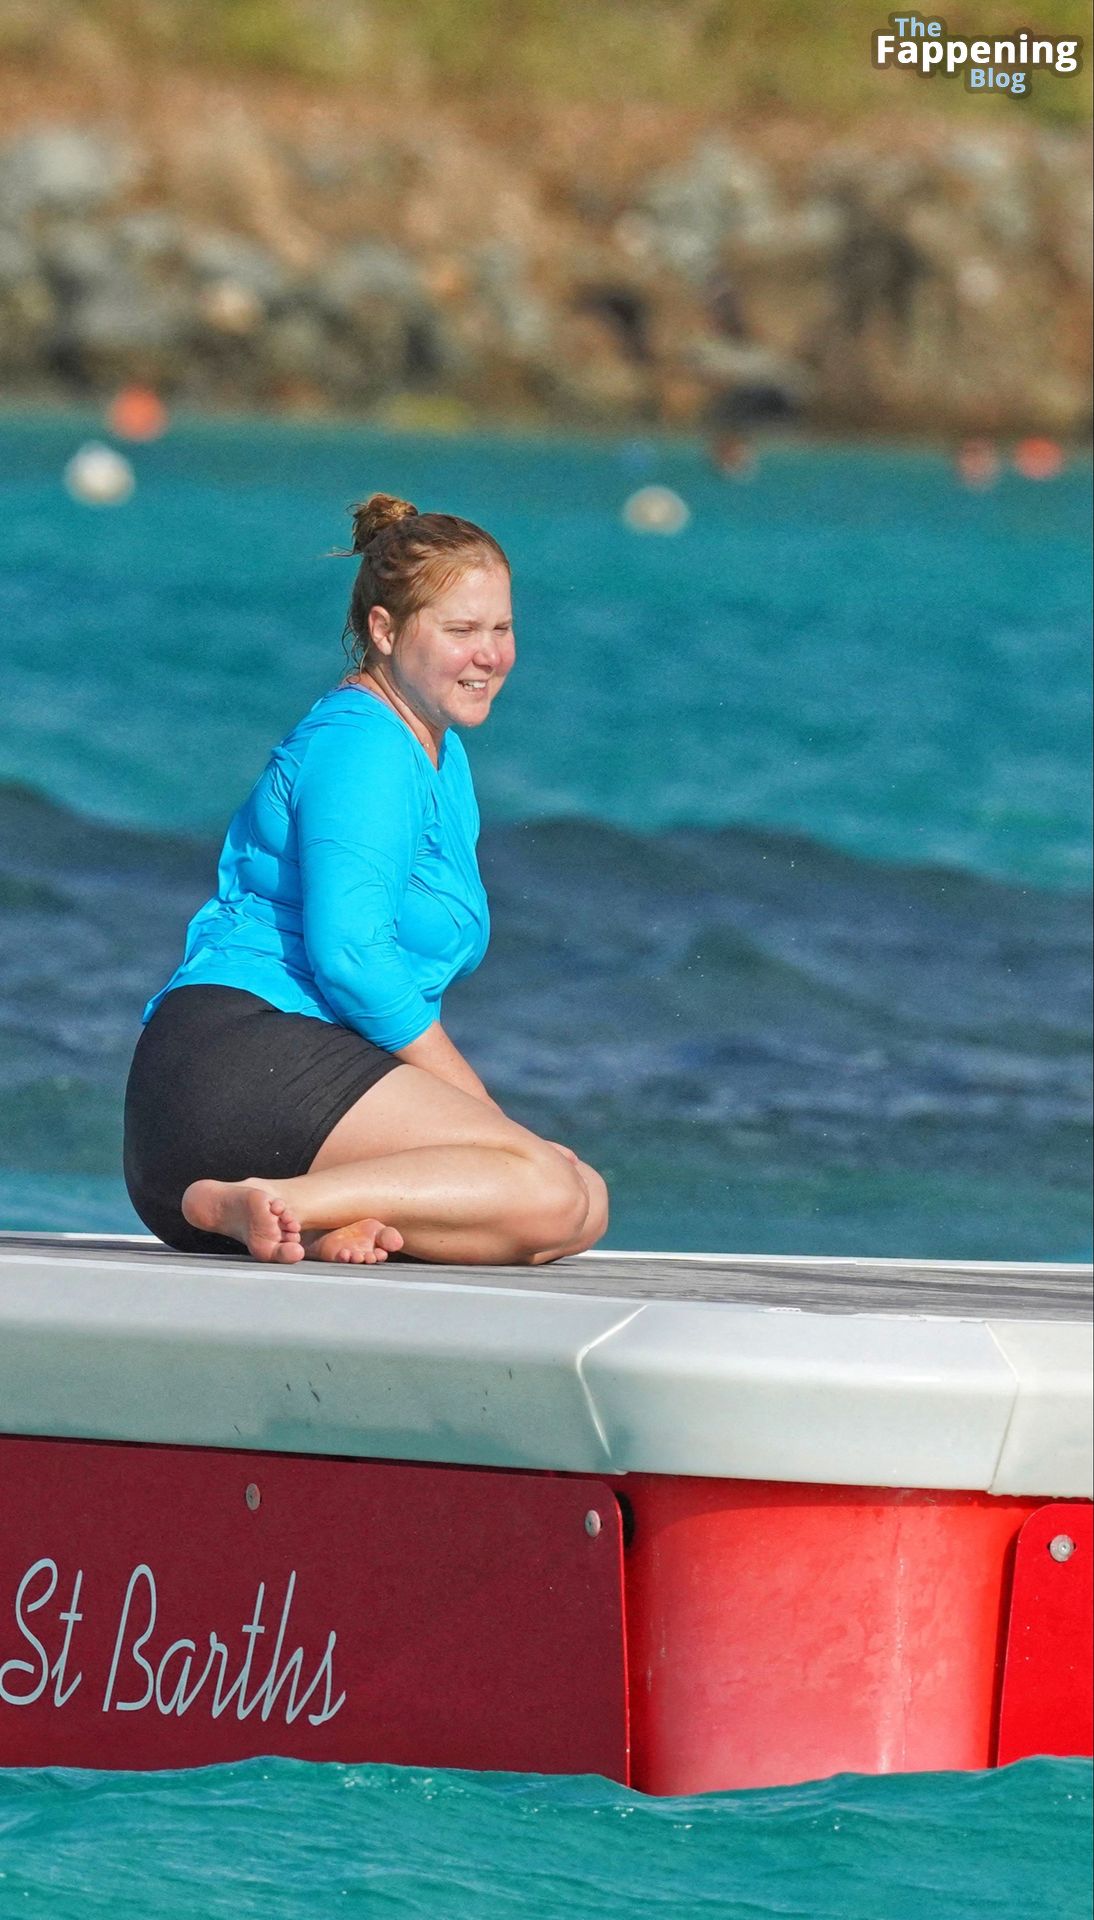 Amy-Schumer-Sexy-The-Fappening-Blog-67.jpg